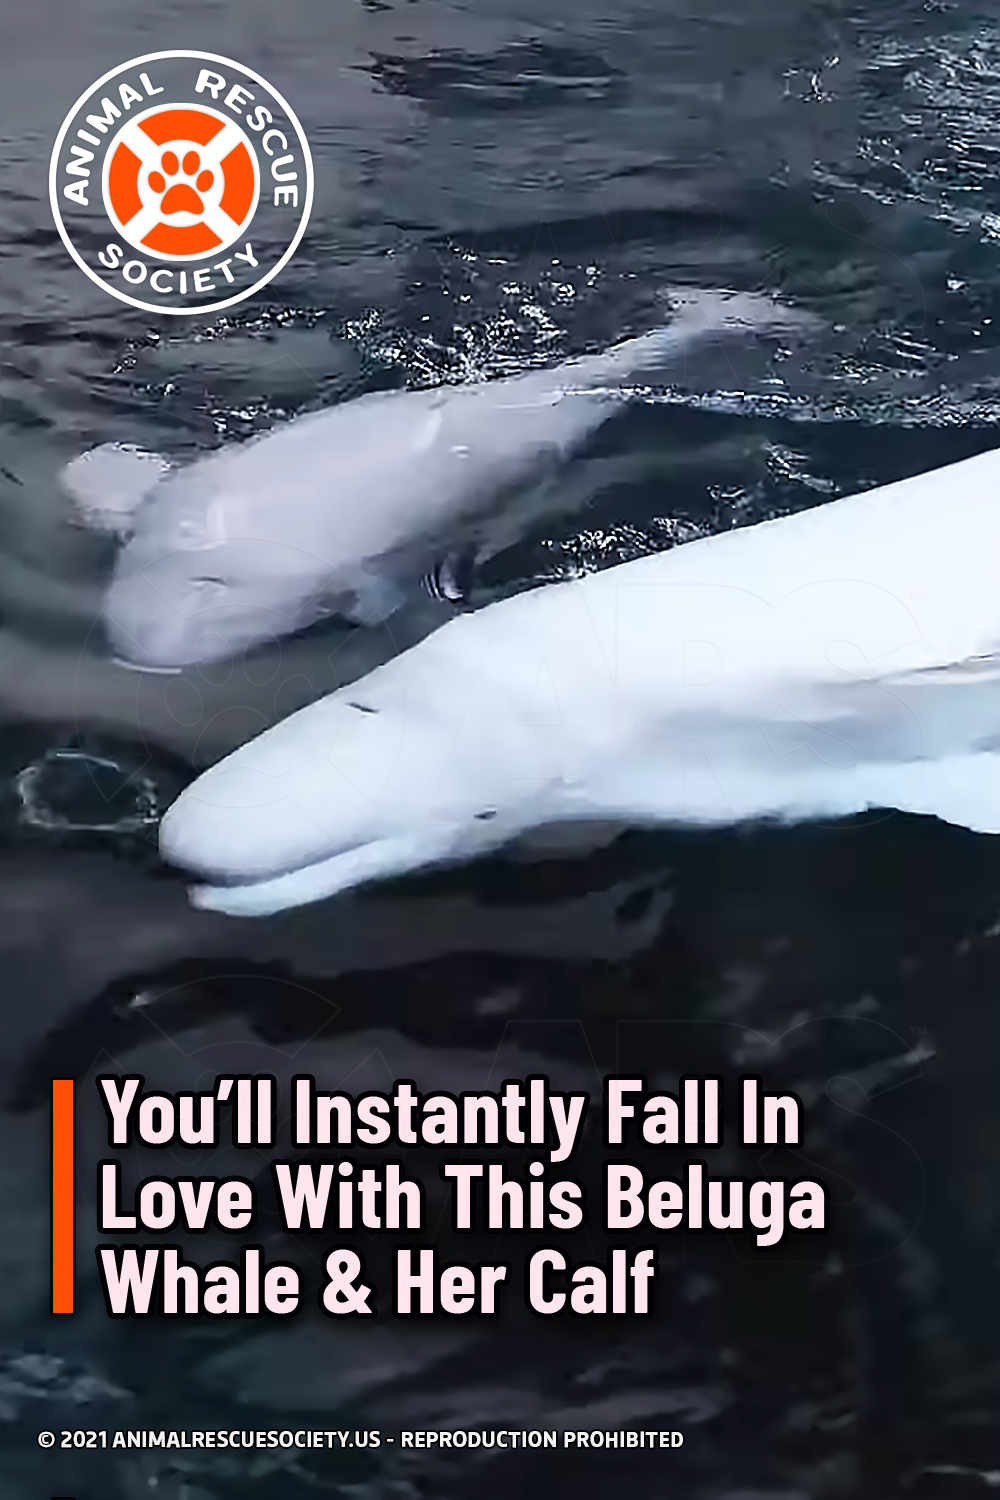 You’ll Instantly Fall In Love With This Beluga Whale & Her Calf